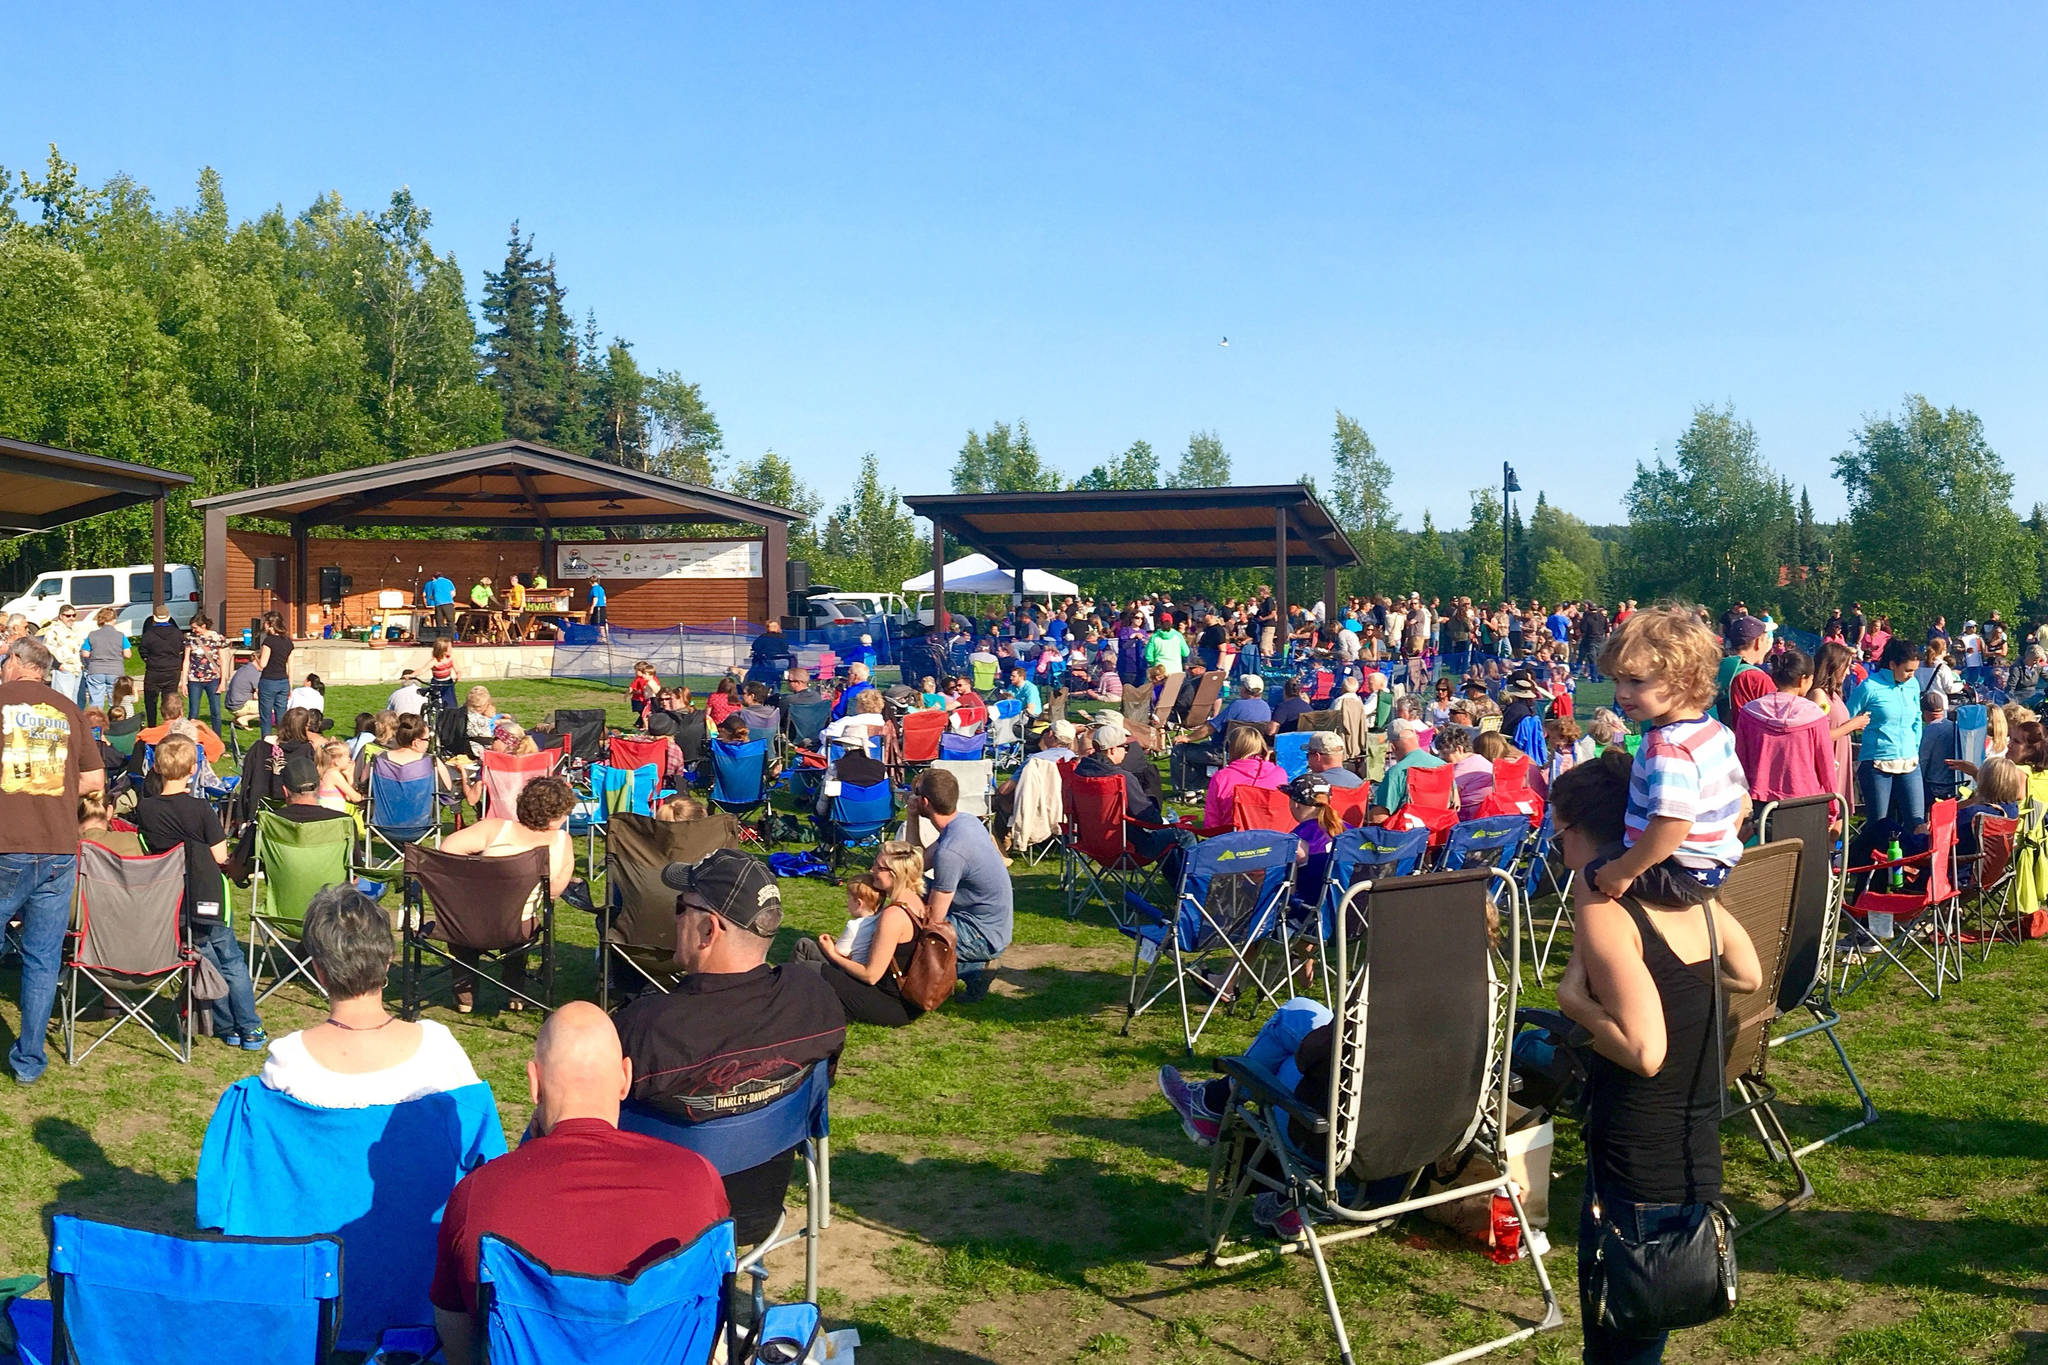 Concertgoers listen during one of the weekly concerts in the park, put on as part of the Levitt AMP Soldotna Music Series in Soldotna, Alaska, in the summer of 2017. (Photo courtesy Andrew Heuiser/Soldotna Chamber of Commerce)